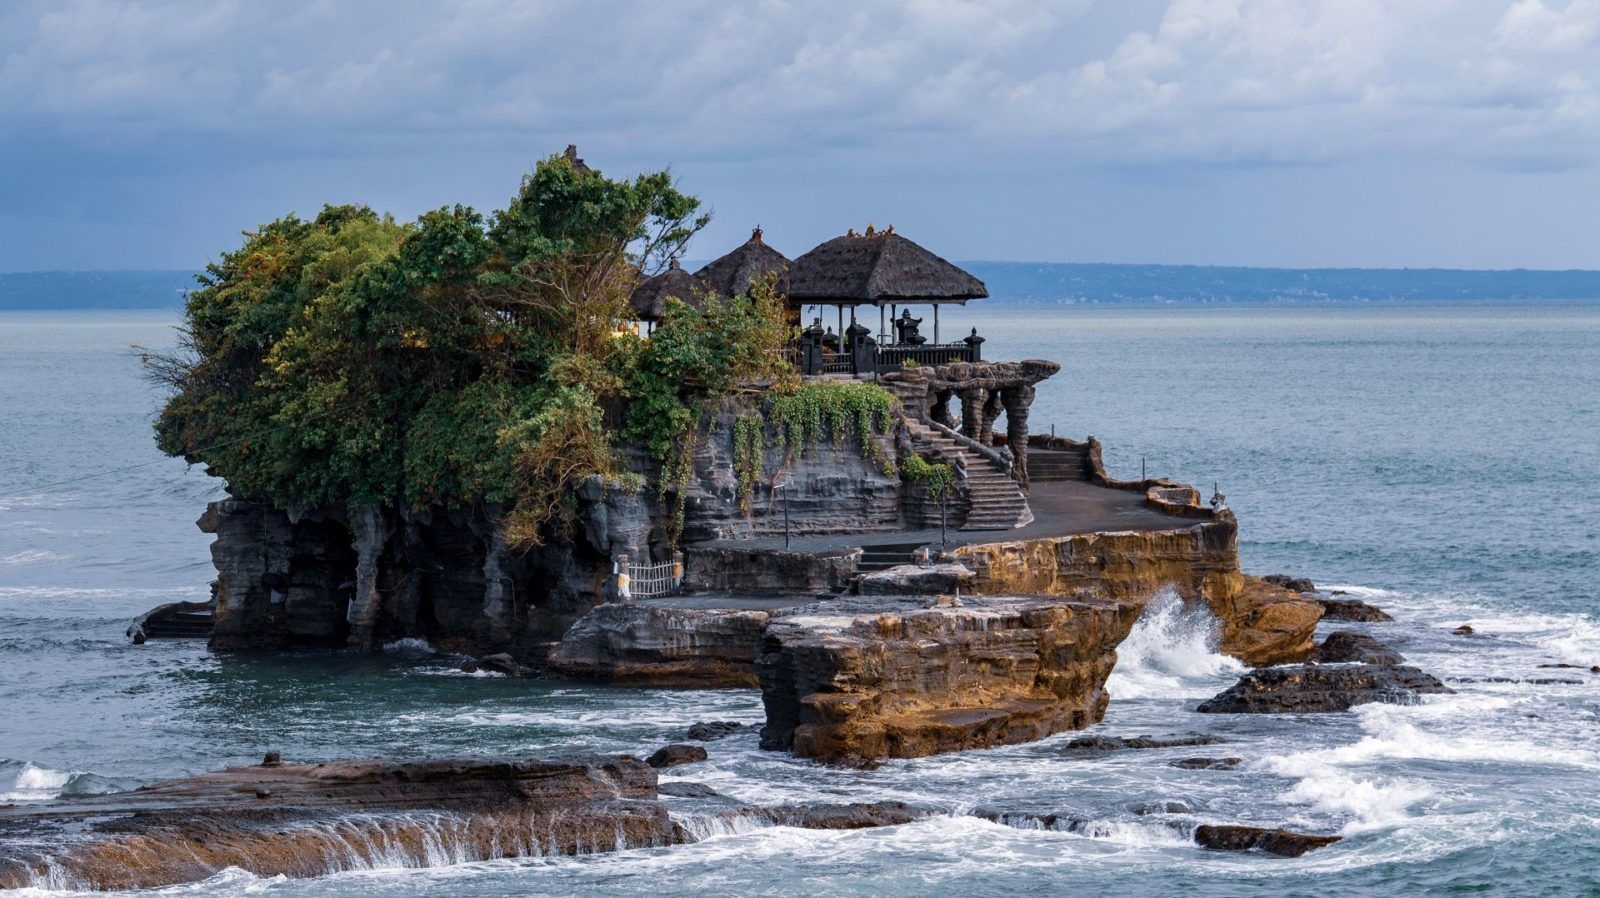 Planning to visit Bali? Find out the latest travel requirements here